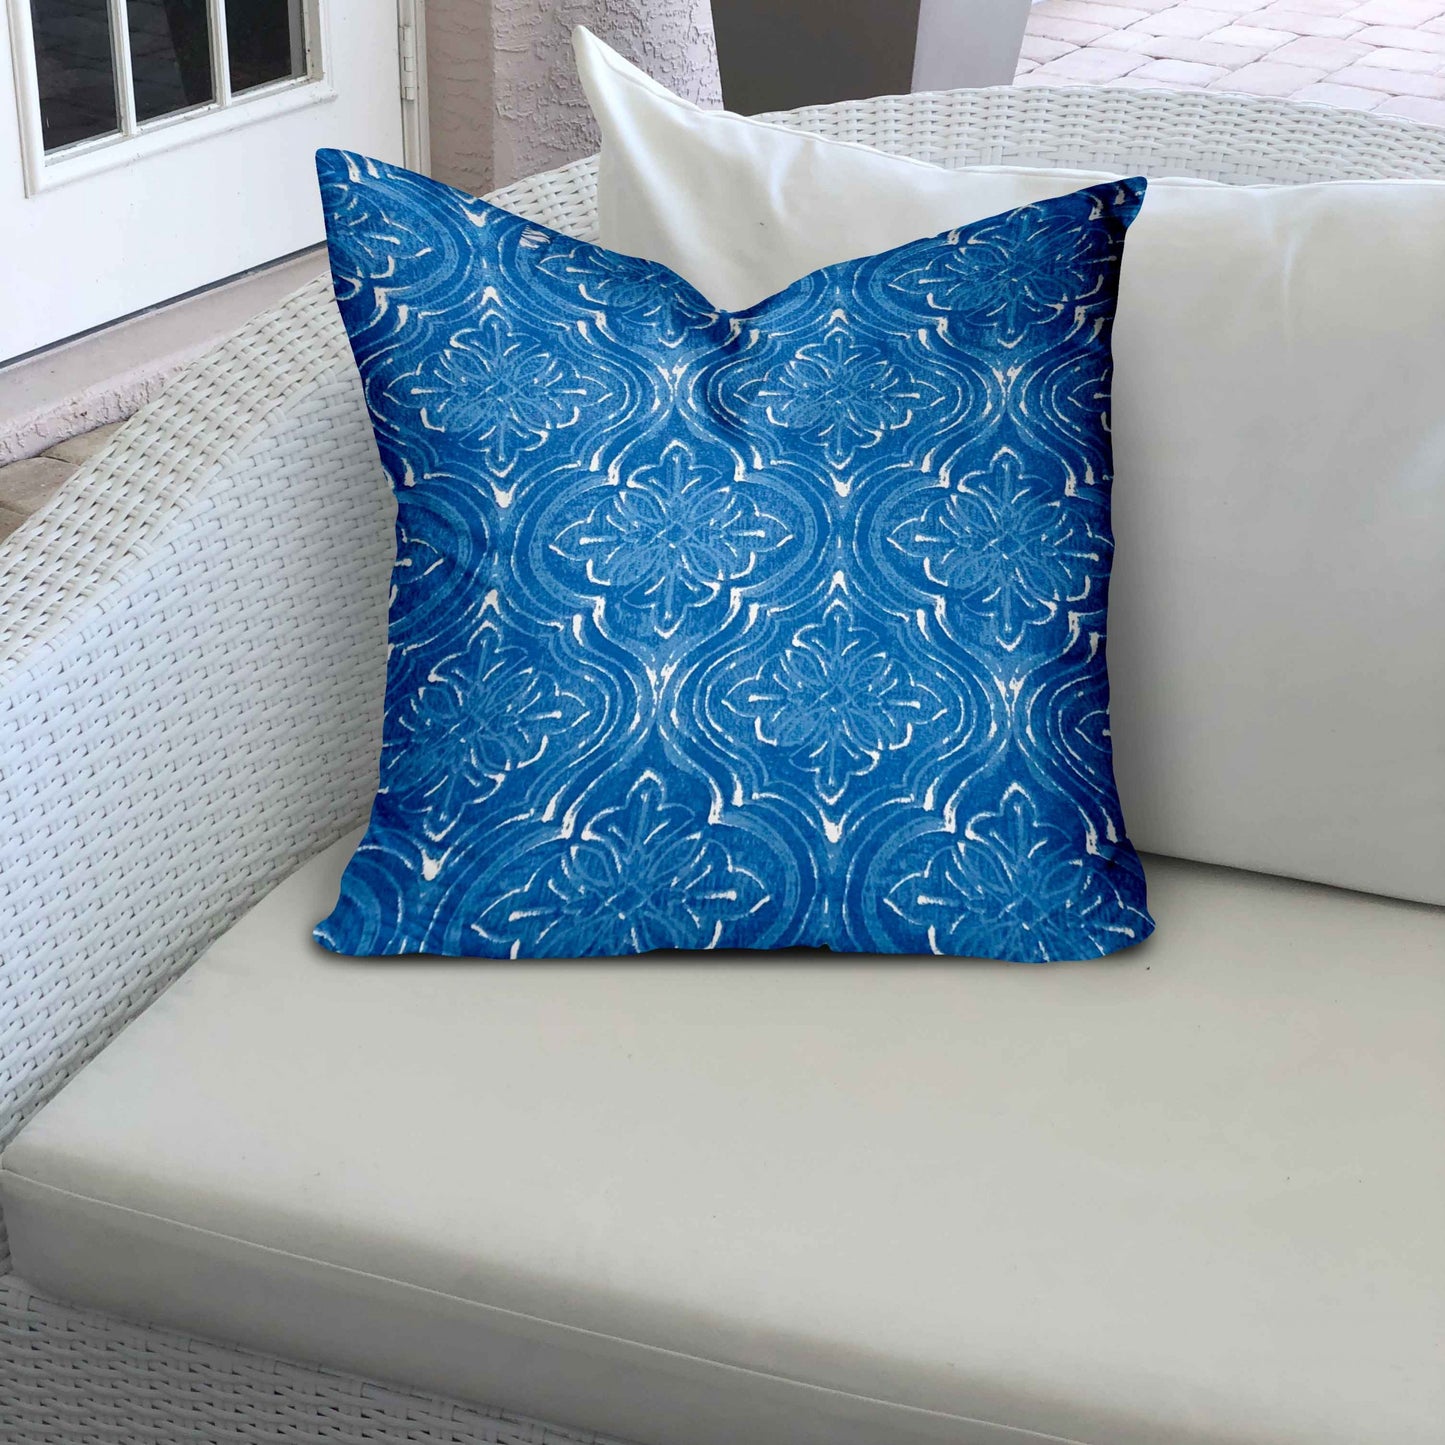 14" X 14" Blue And White Zippered Ikat Throw Indoor Outdoor Pillow